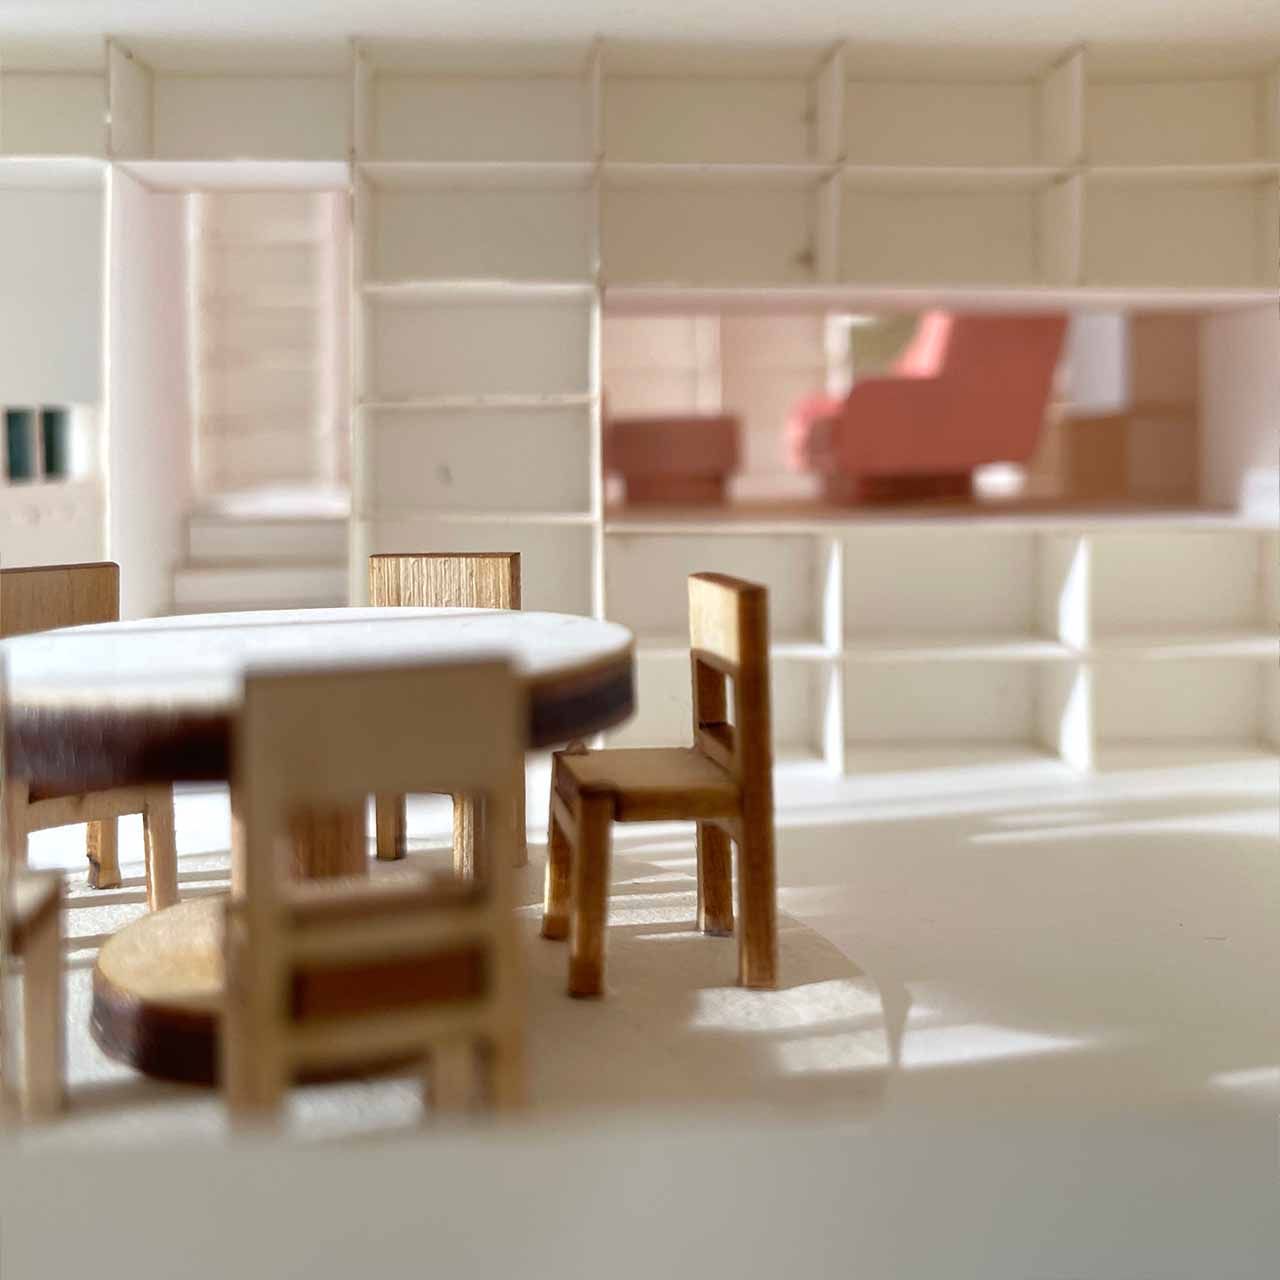 Interior model photo of a kitchen table